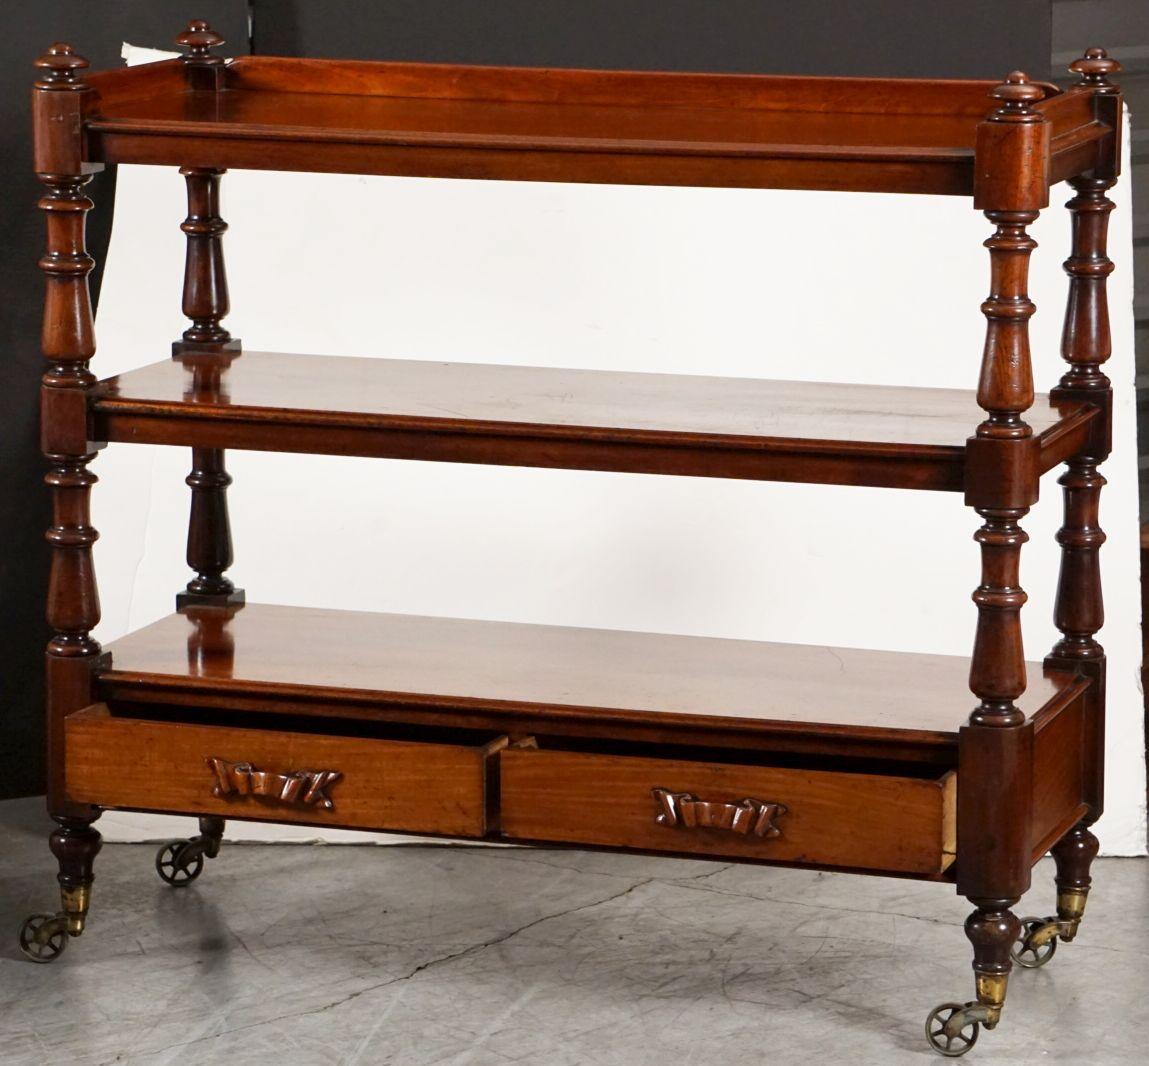 A fine English trolley server (or dumb waiter) of mahogany featuring three tiers with mouded-edge tops, each tier adjoined to four turned column supports, set upon rolling spoke casters of brass. 
The top tier with gallery around the sides and